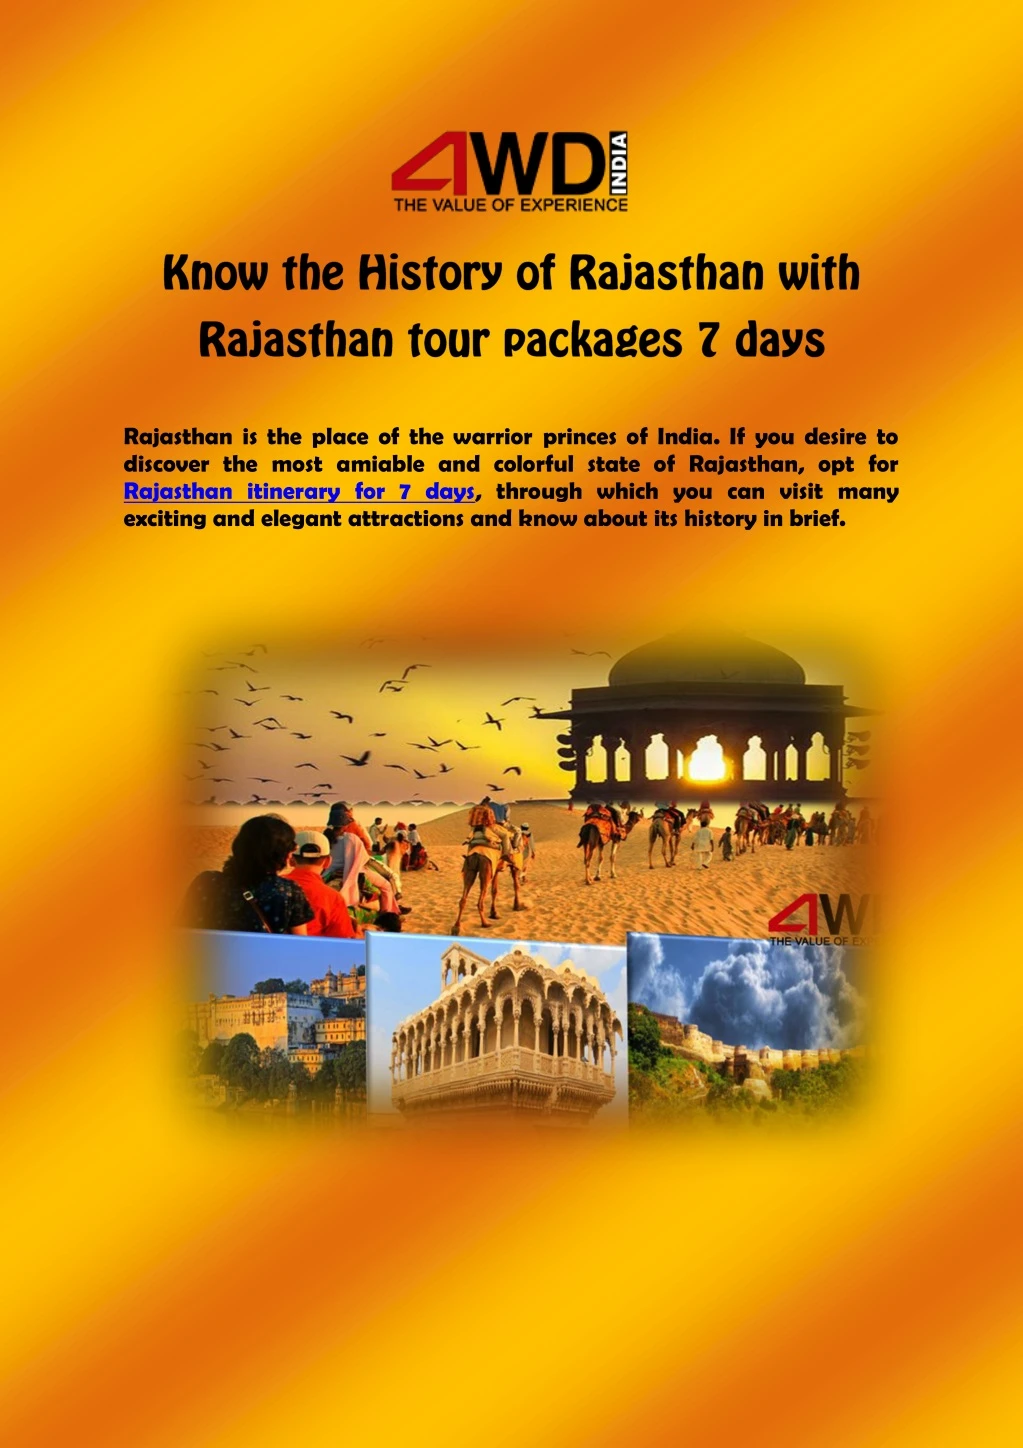 rajasthan is the place of the warrior princes